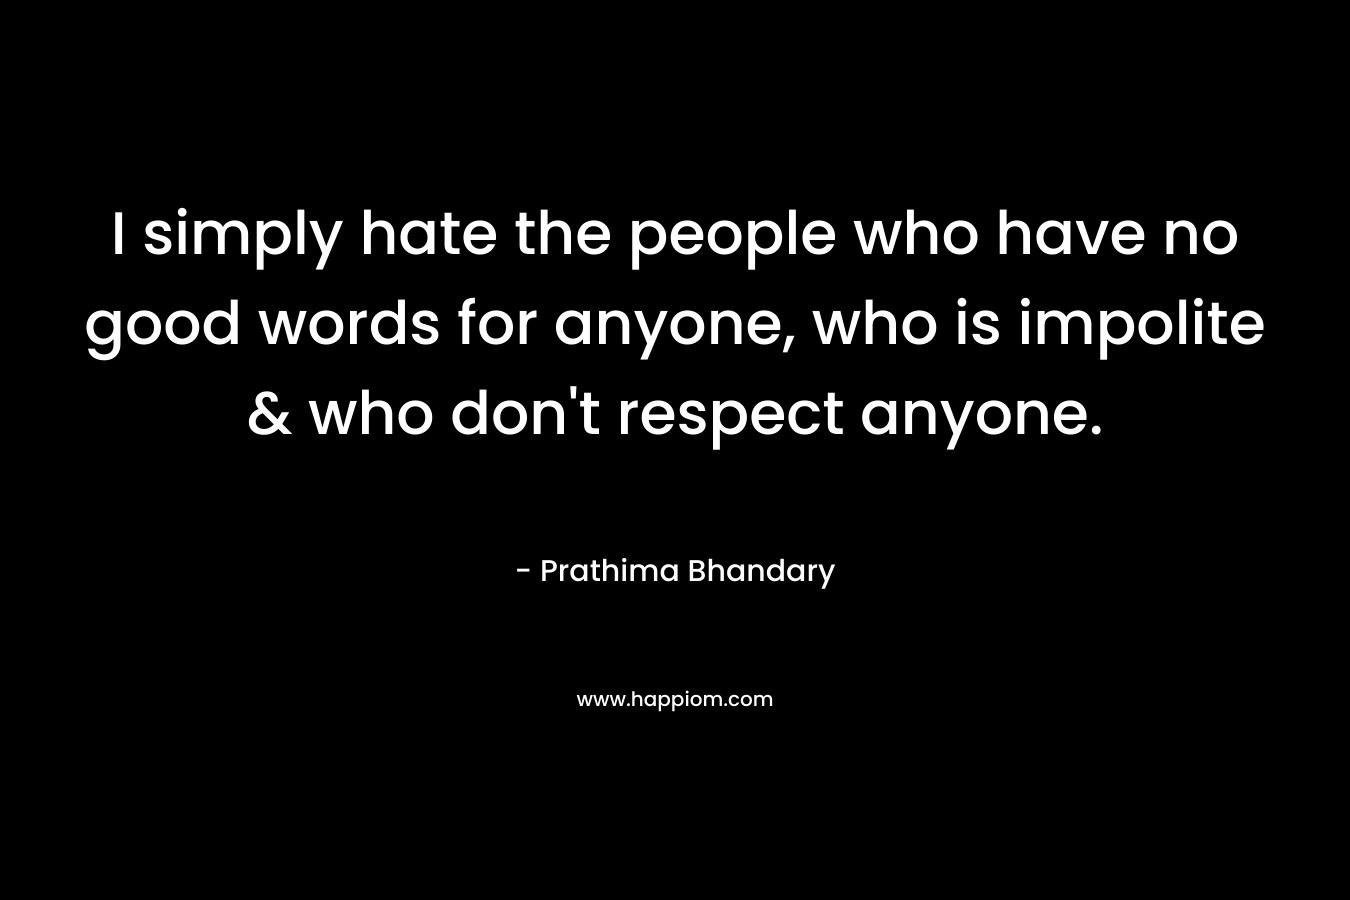 I simply hate the people who have no good words for anyone, who is impolite & who don’t respect anyone. – Prathima Bhandary